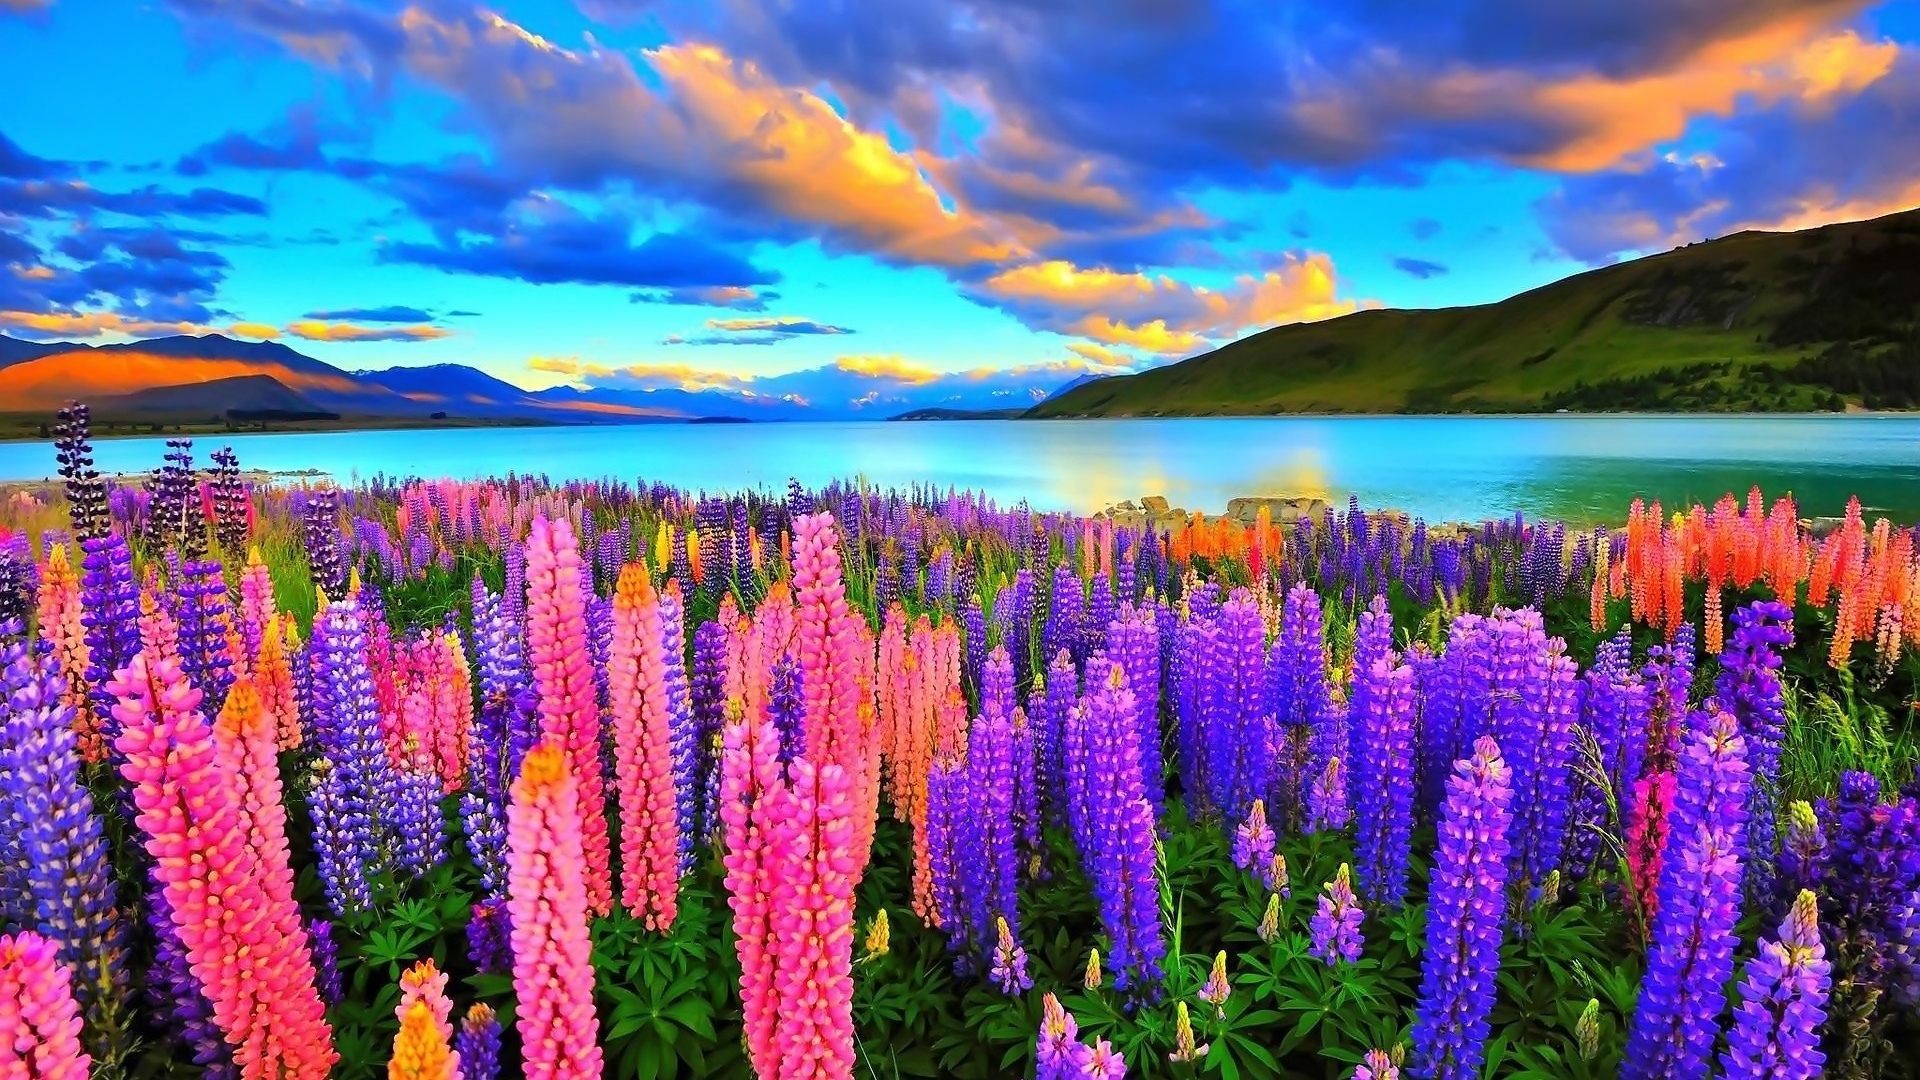 Lupine Wallpapers